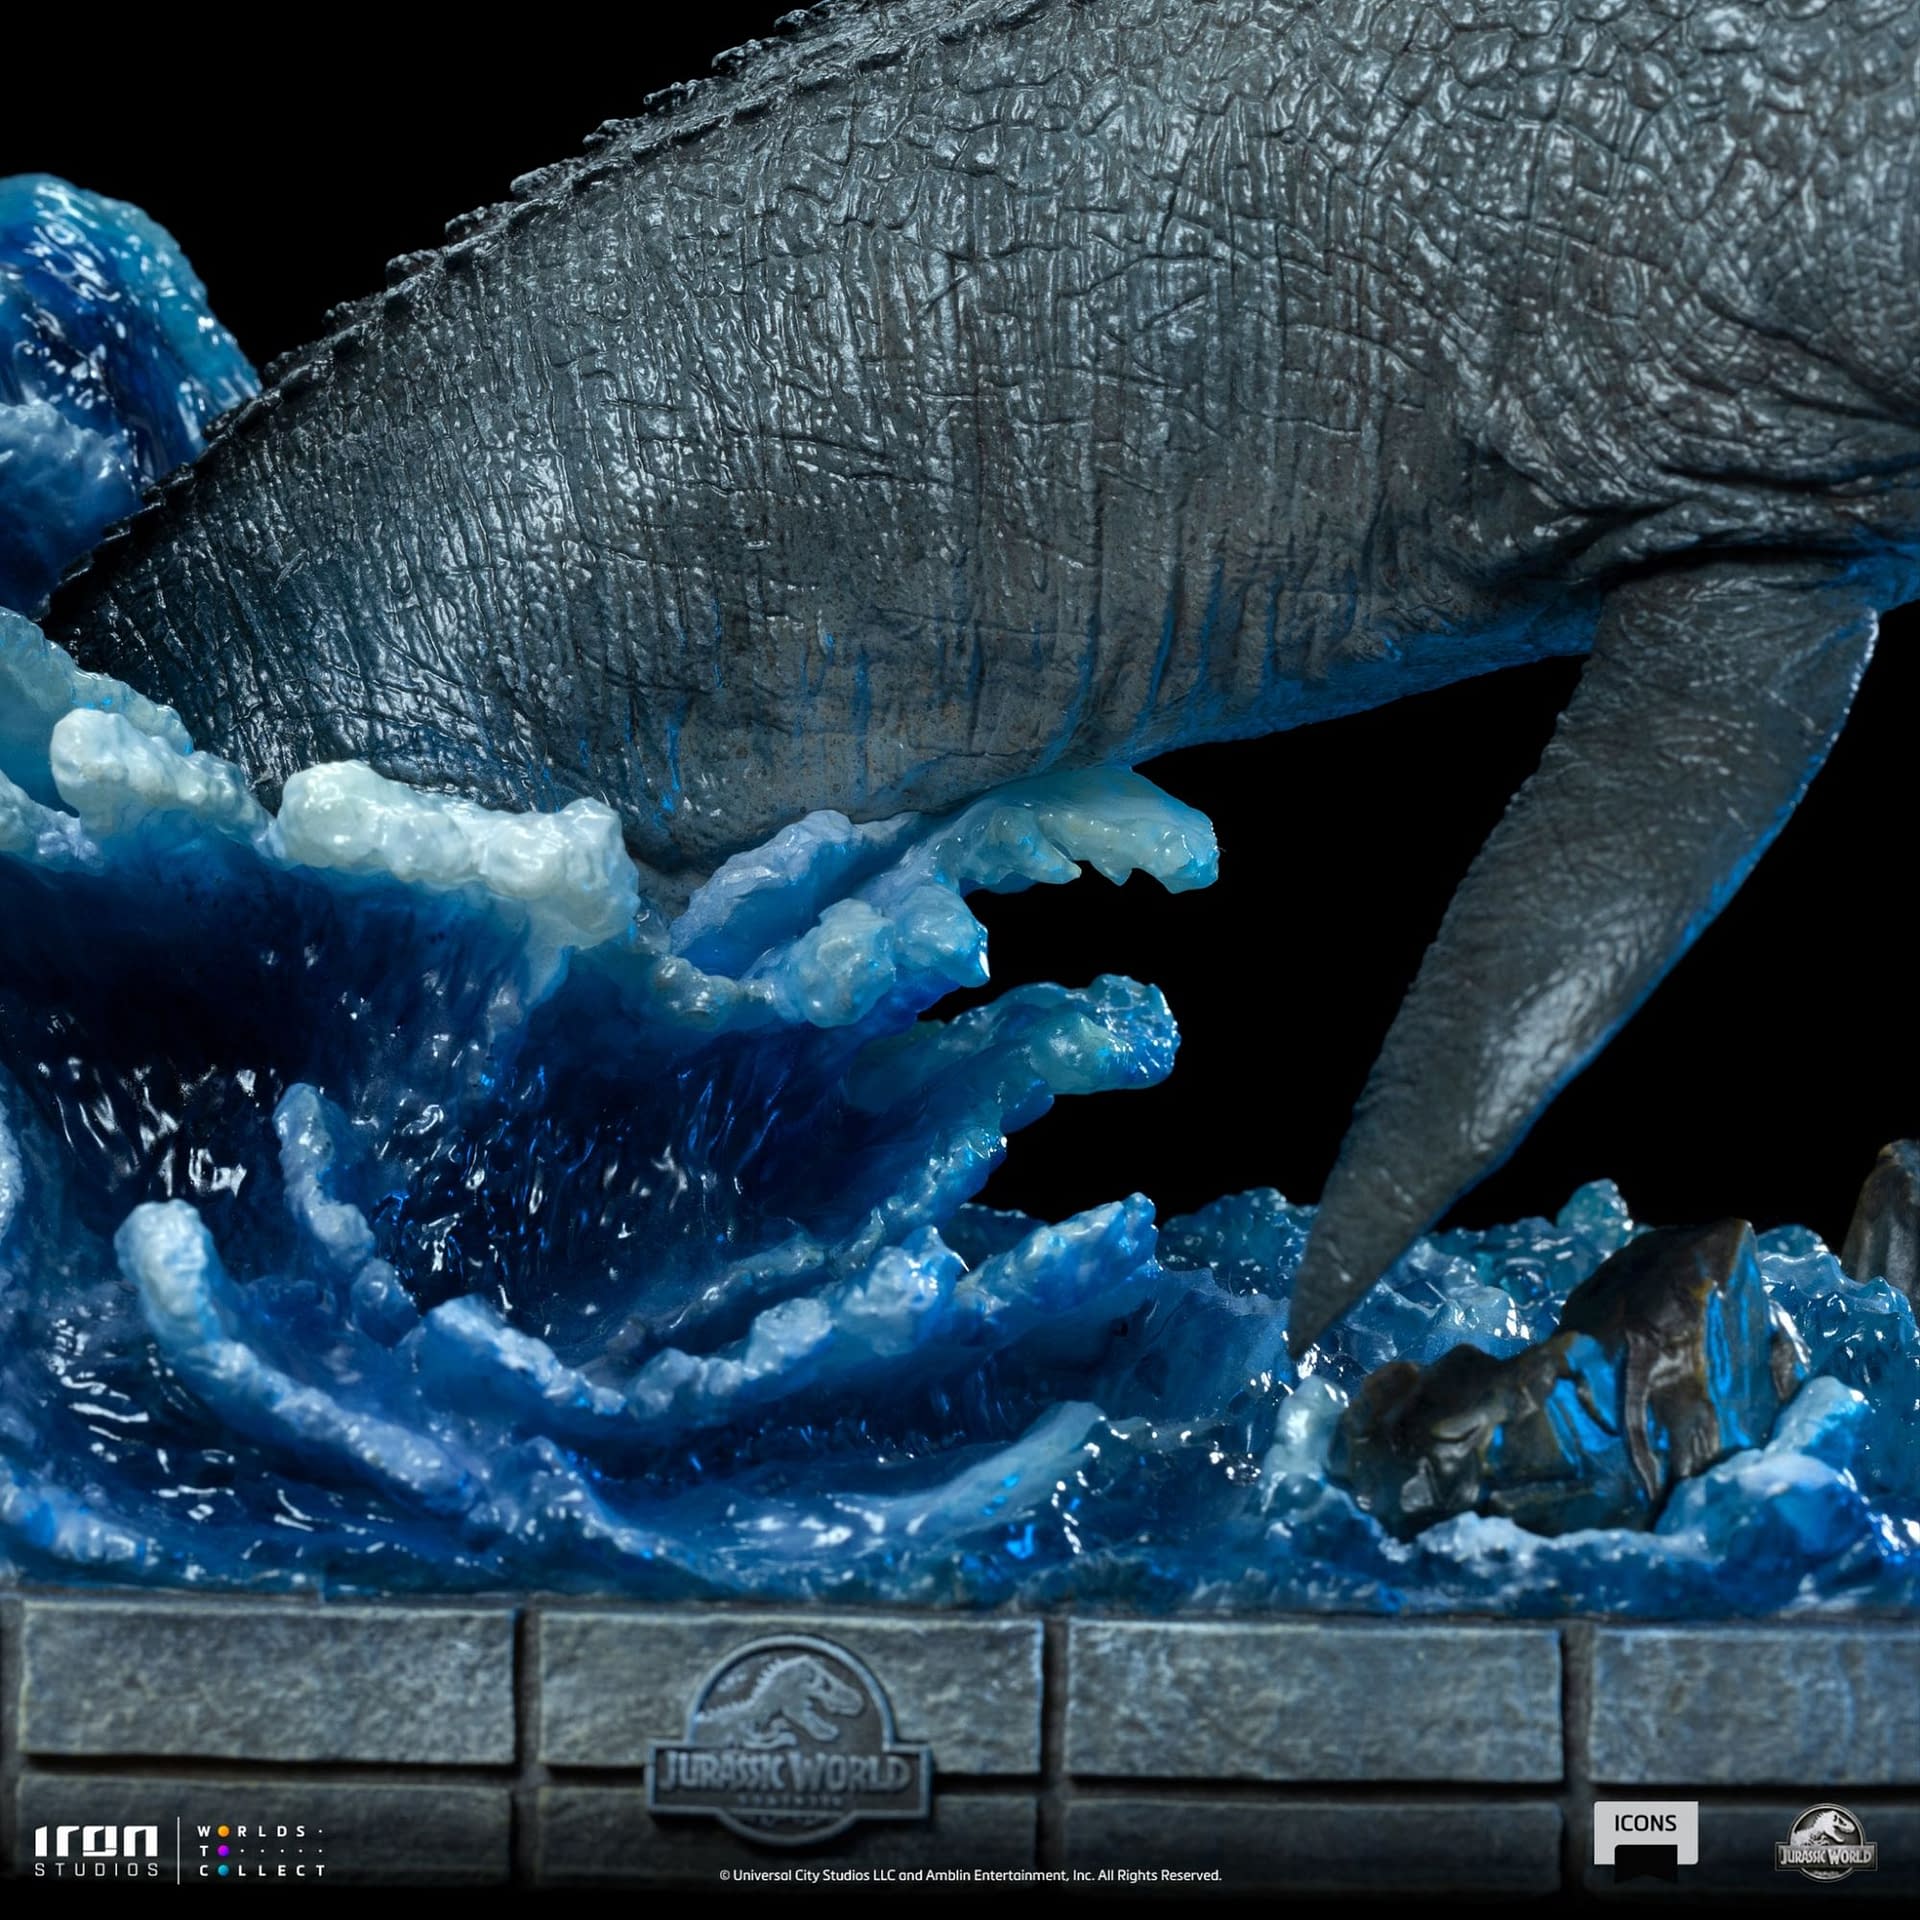 Jurassic World Mosasaurus Takes a Bite Out of Iron Studios